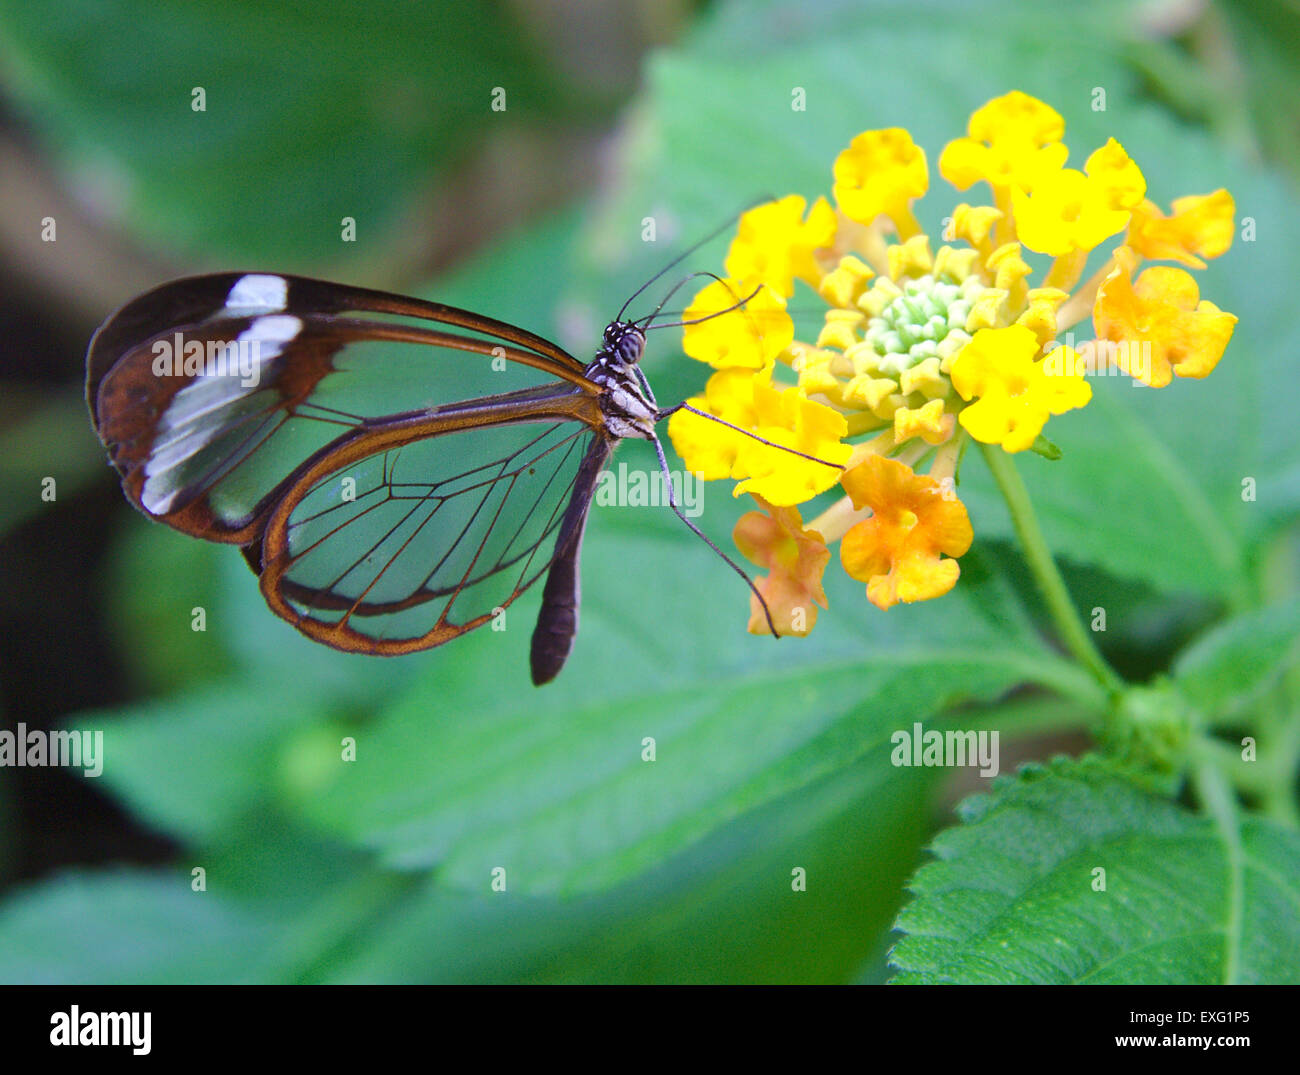 Greta Oto butterfly with transparent wings feeds on a flower Stock Photo